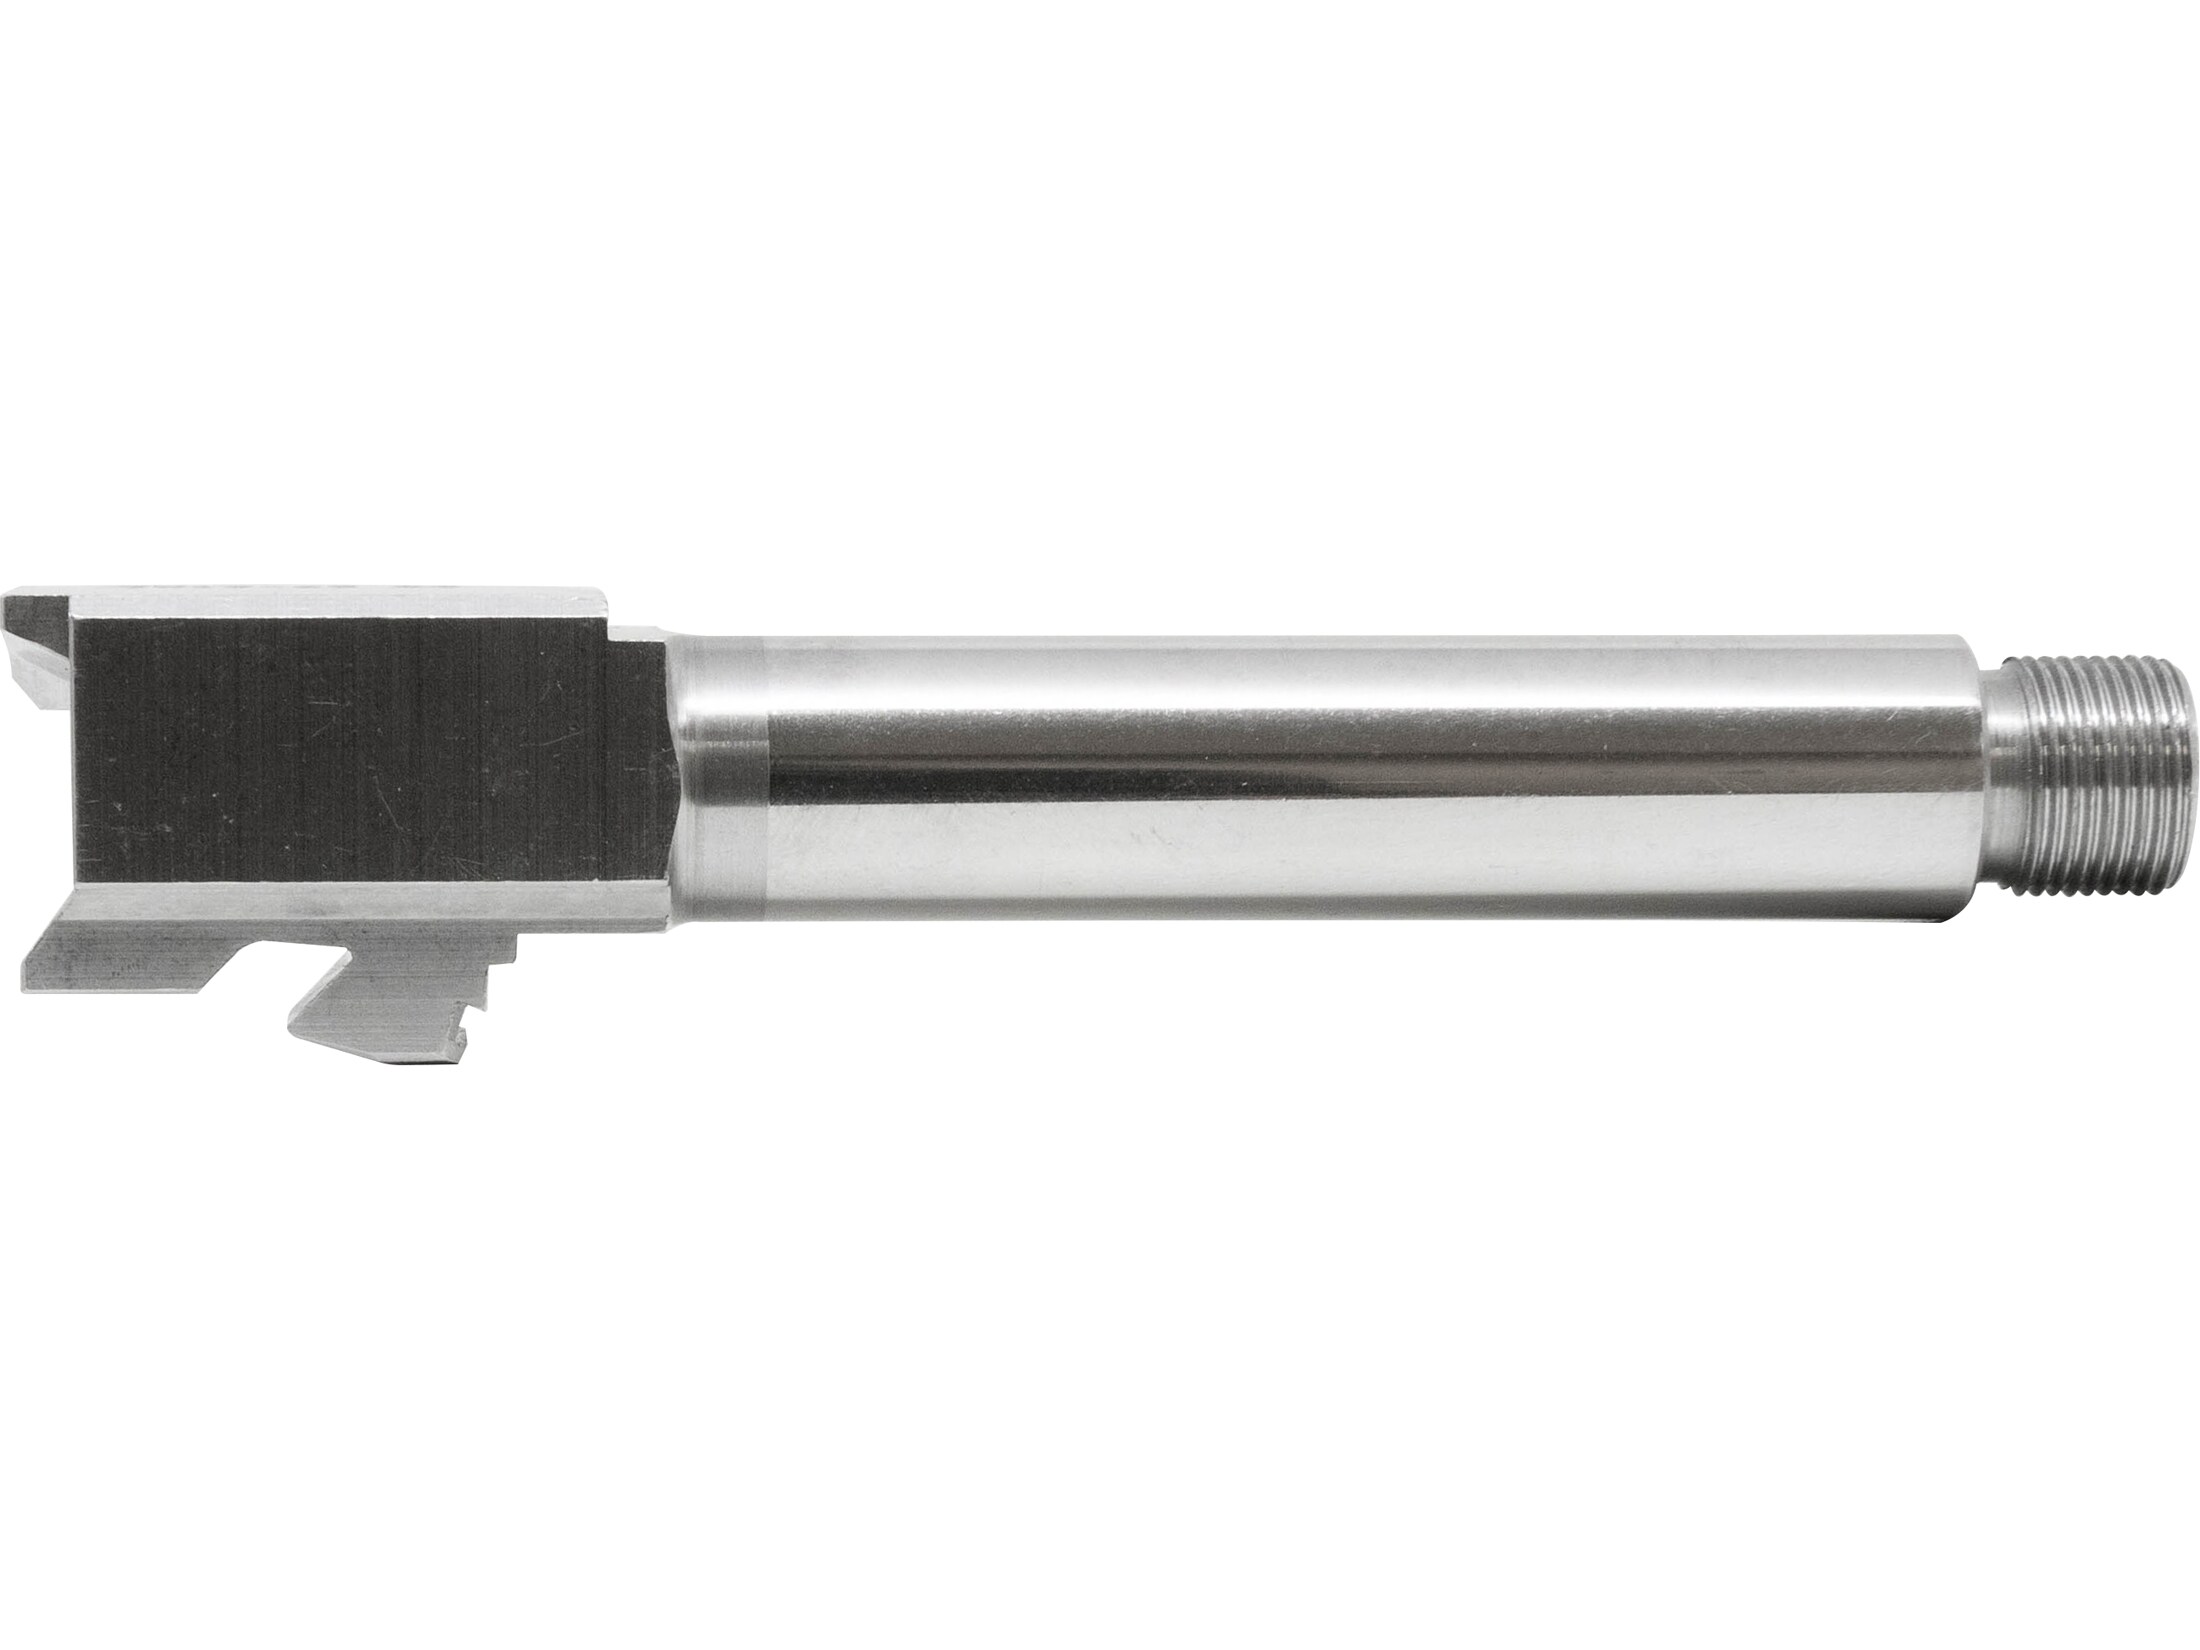 Barrel for Glock 23 Gen 1-4 G23 .40 cal CONVERSION to 9mm Stainless Steel 